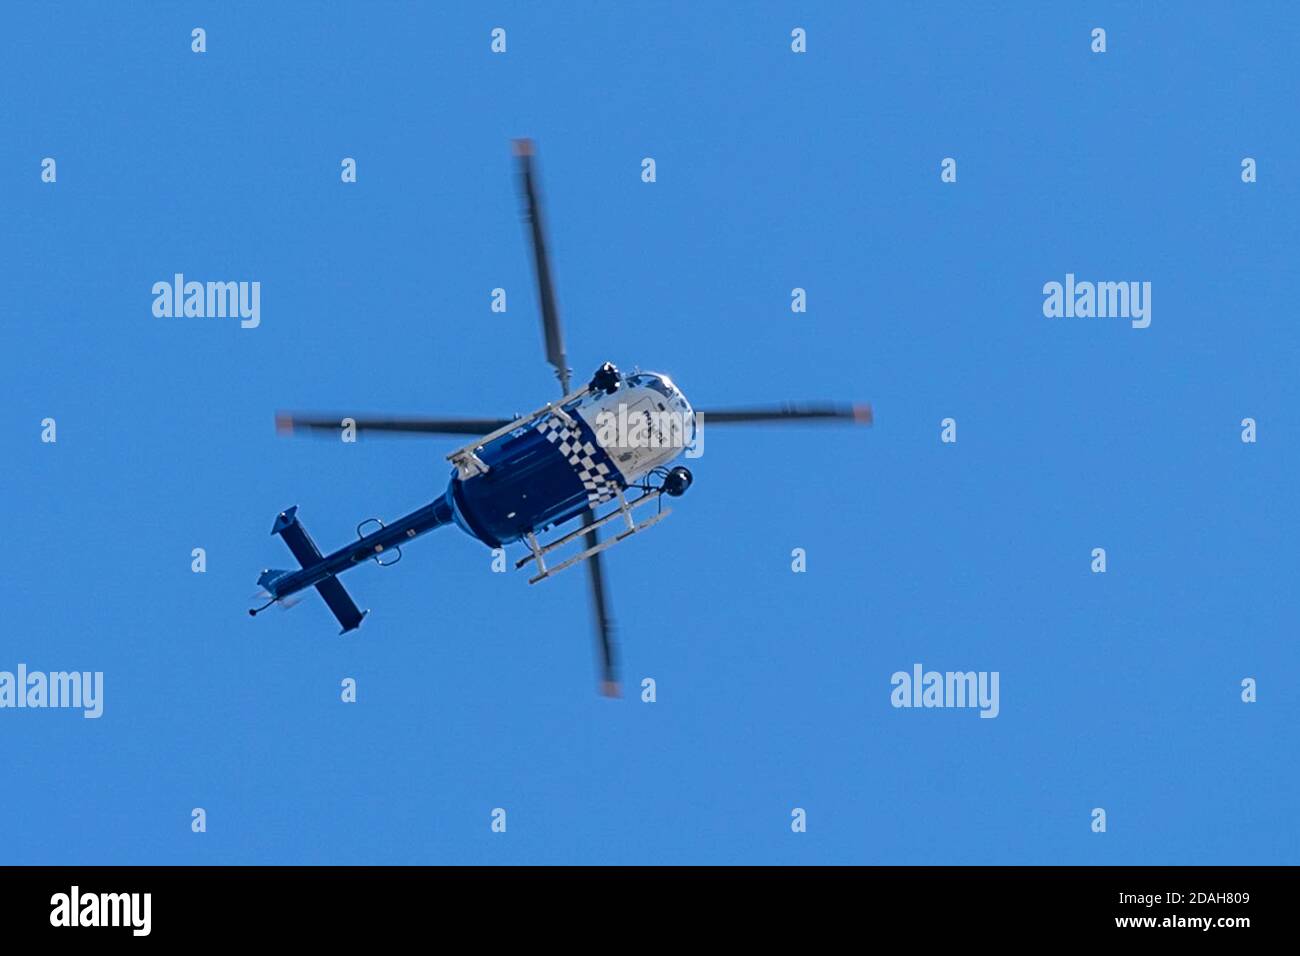 Upward shot of a queensland police helicopter Stock Photo